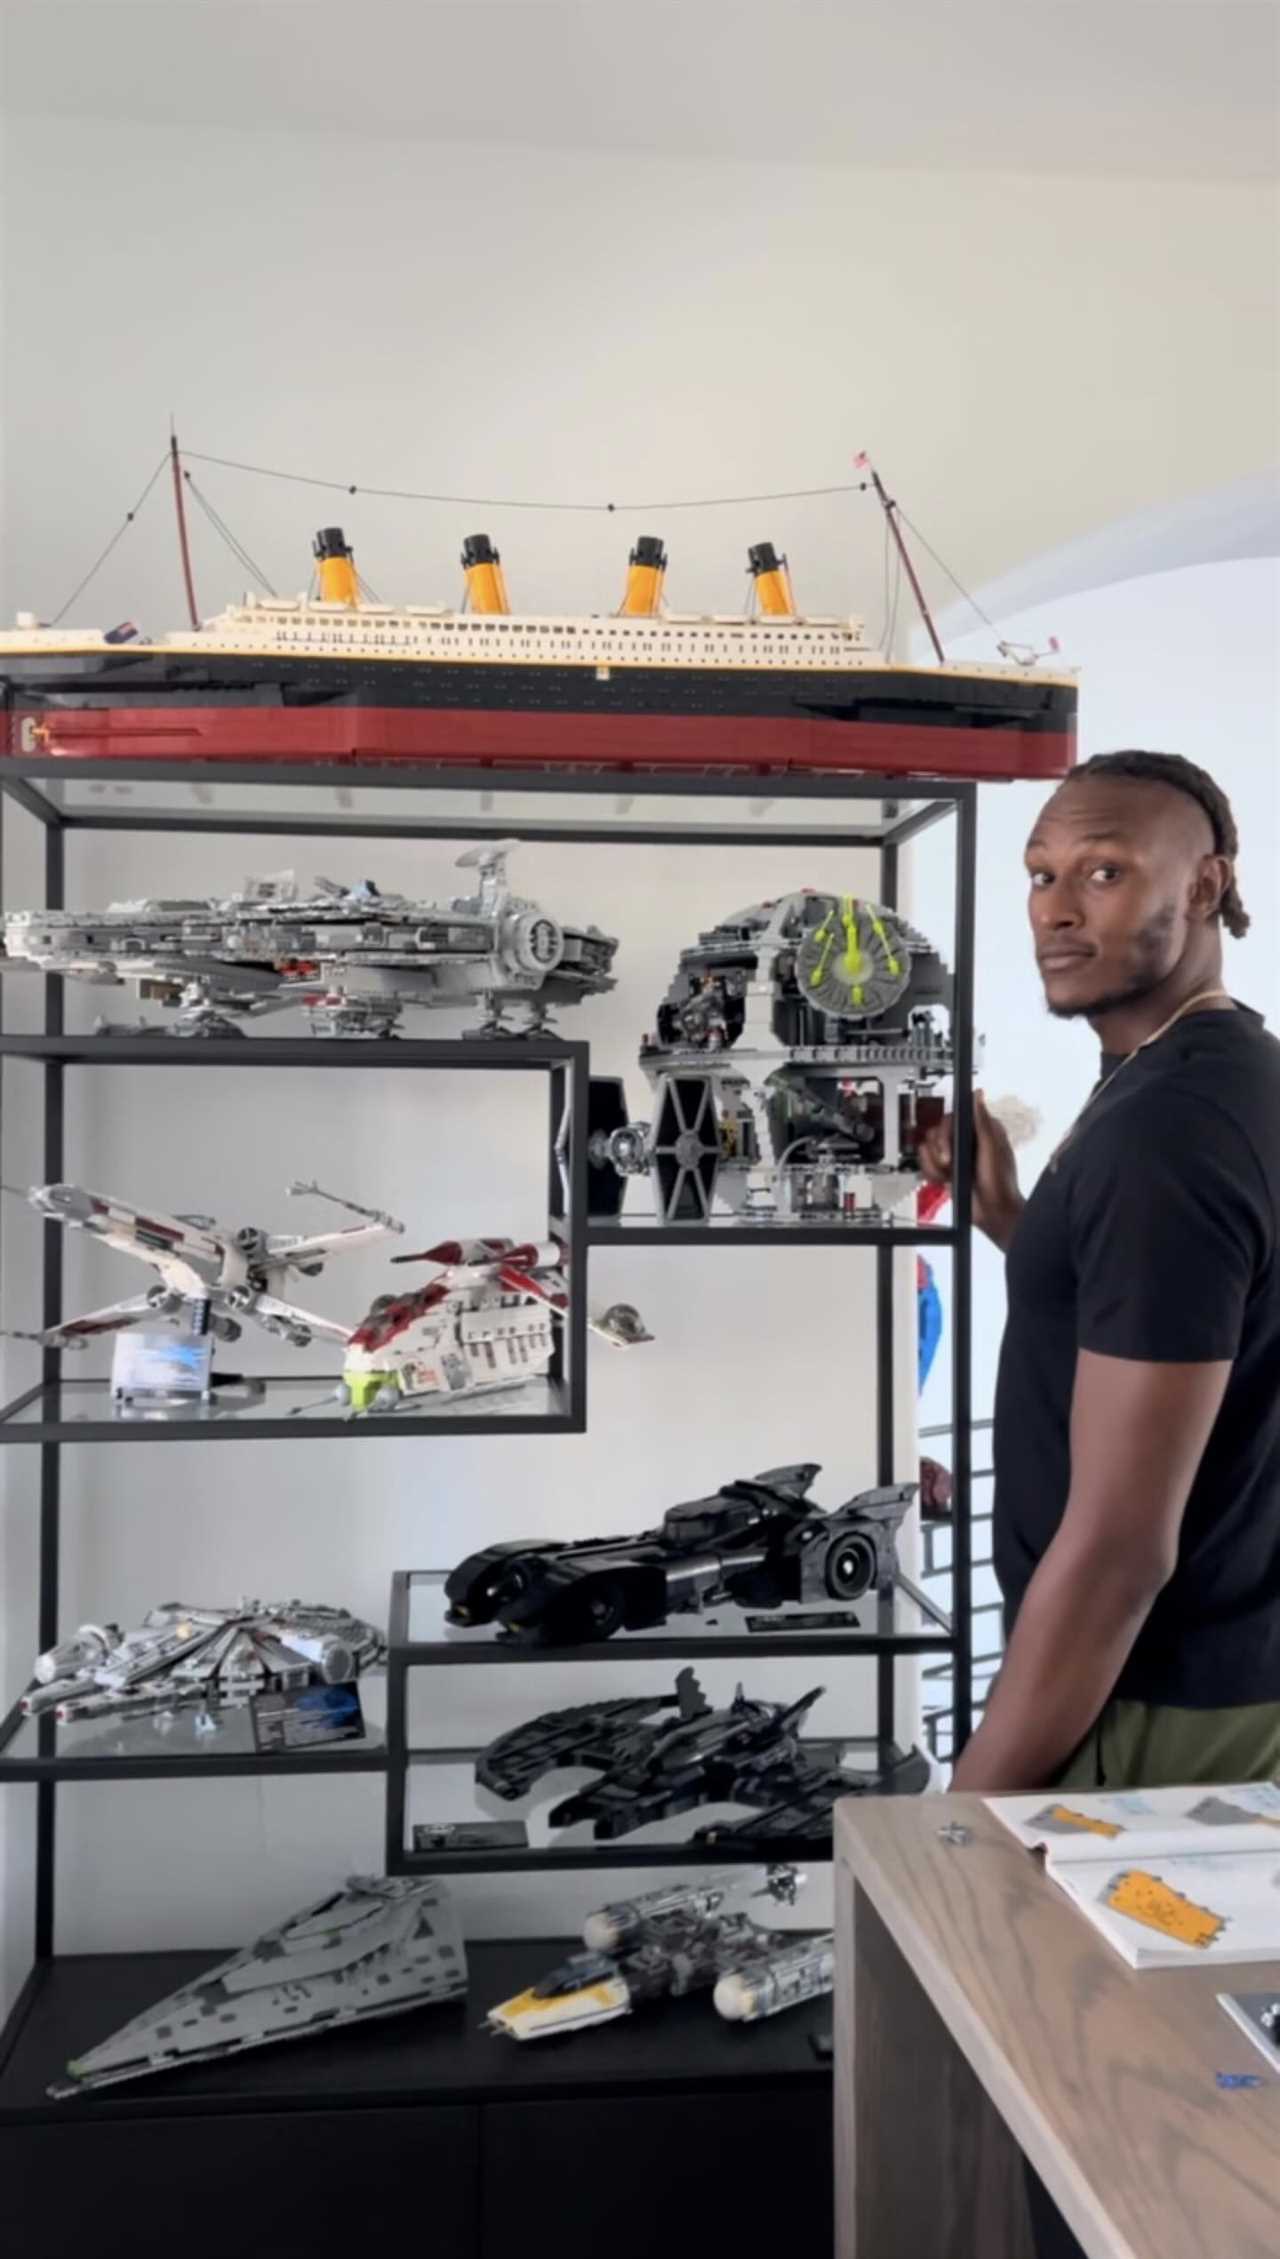 The True Story Behind Myles Turner’s Dedication to His Legos Craft—from Childhood to the Pacers